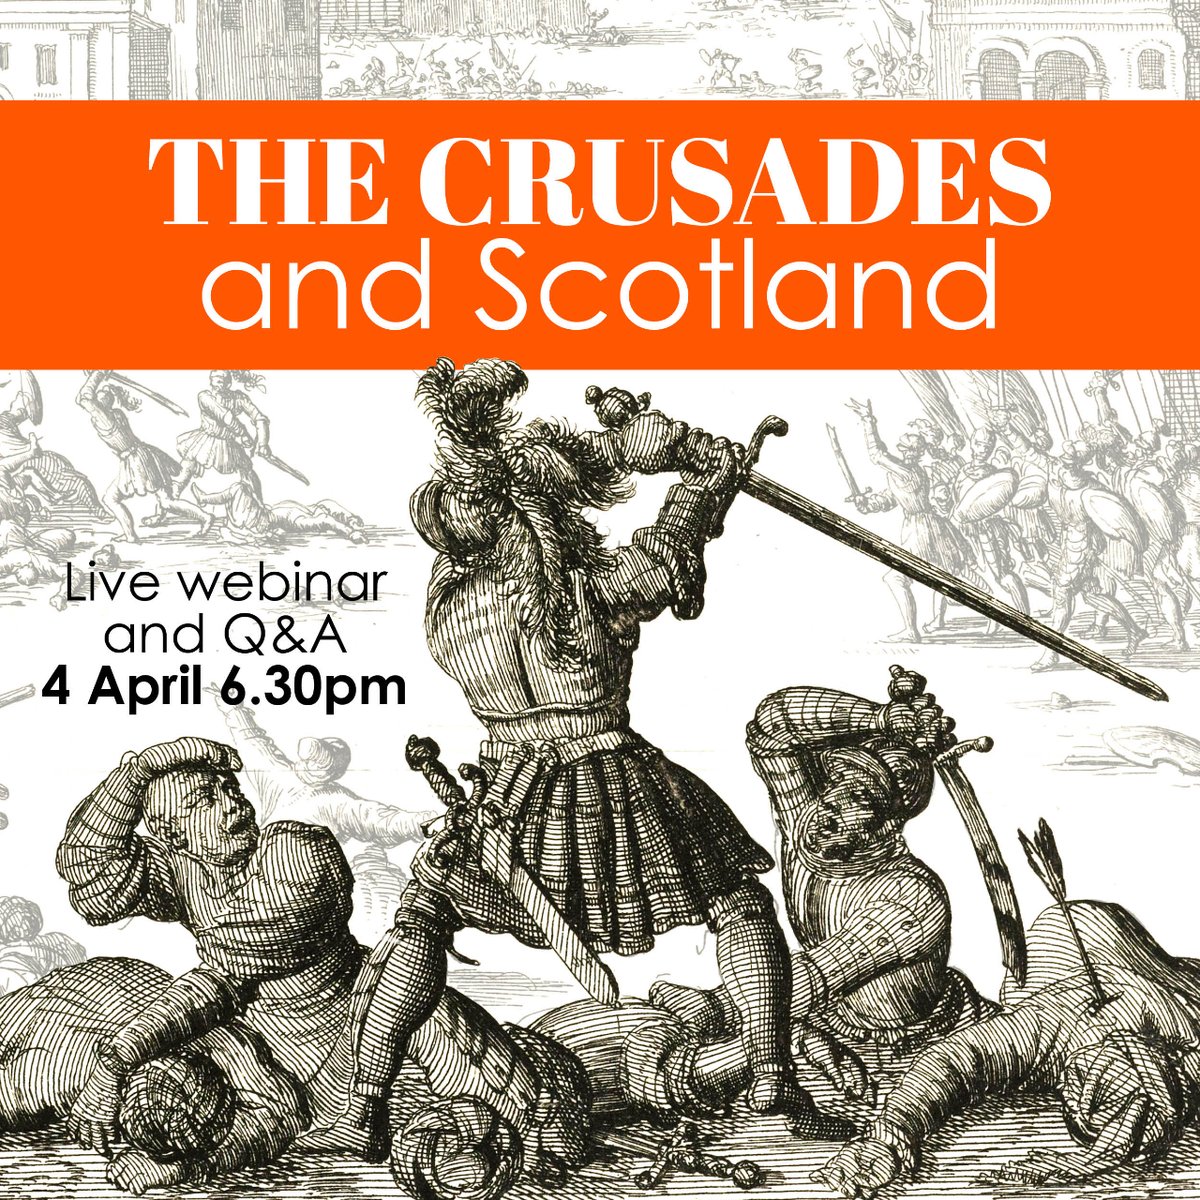 EXPERT WEBINAR TONIGHT! ⏰ For centuries, Scots fought in Crusades to the Holy Land, Spain, and the Baltic. Discover more about the role they played in these wars in this talk and Q&A with Dr Rory Maclellan. Book your place now and join us this evening: us06web.zoom.us/webinar/regist…